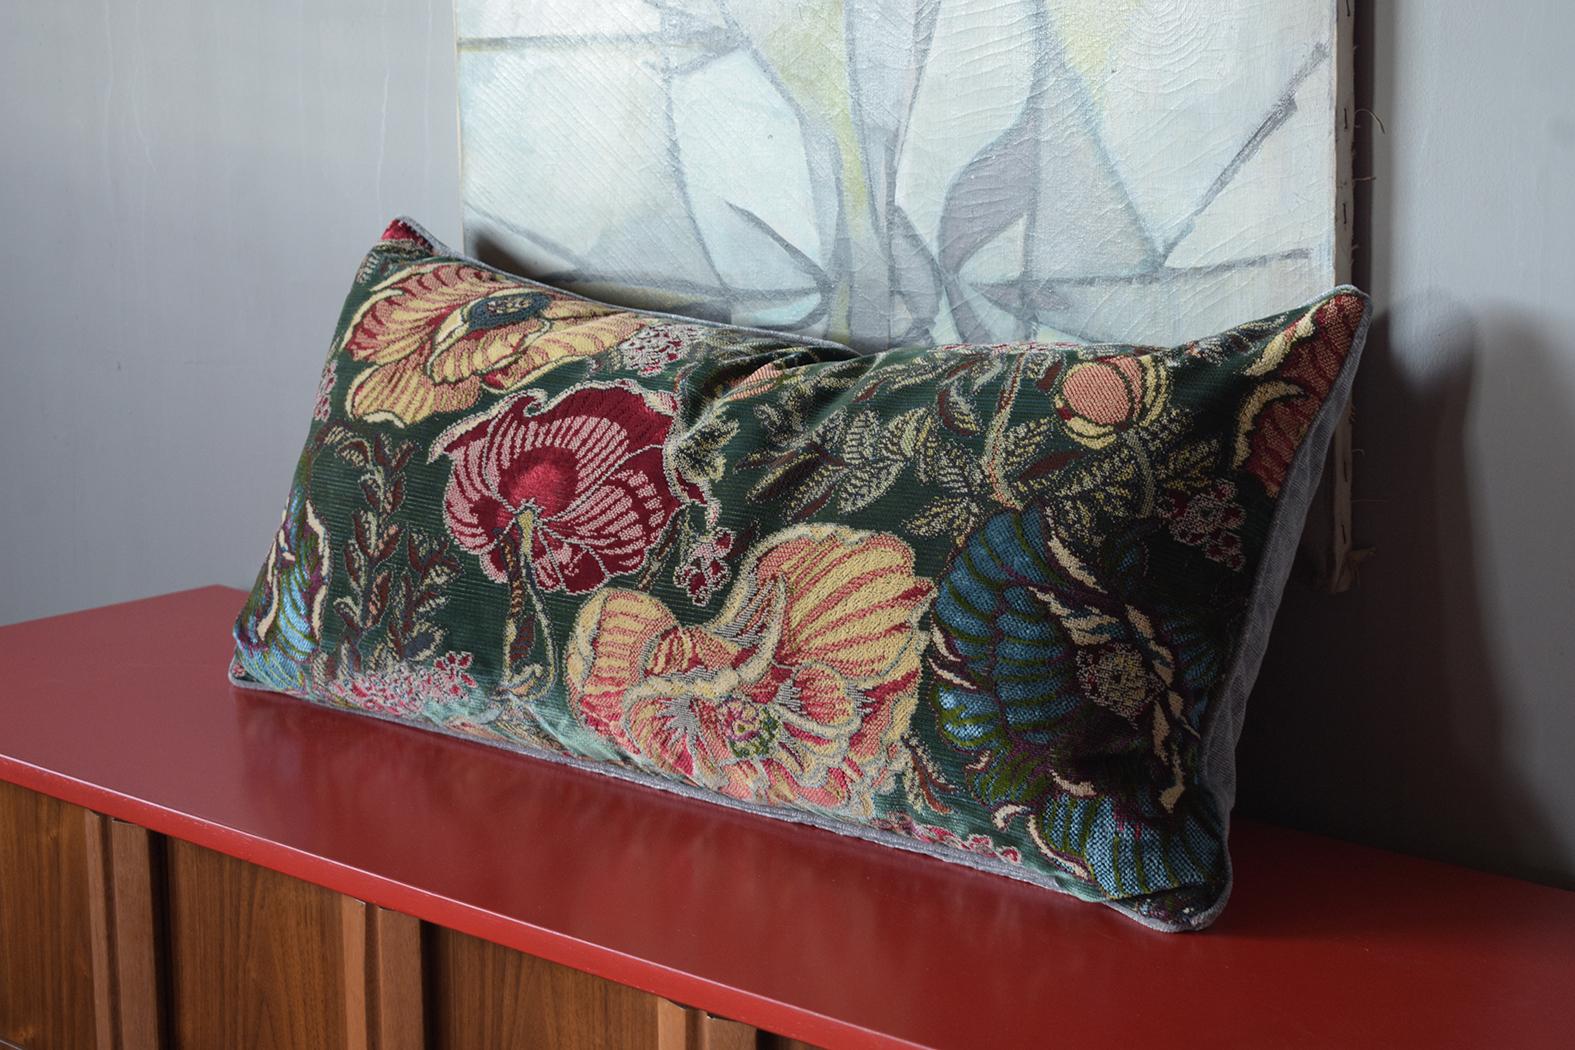 Experience the allure of the 1910s with our vintage botanical velvet pillows. Each pillow vividly displays a rich tapestry of colorful flowers, intertwined with intricate stems and leaves. The solid blue velvet backing perfectly complements the